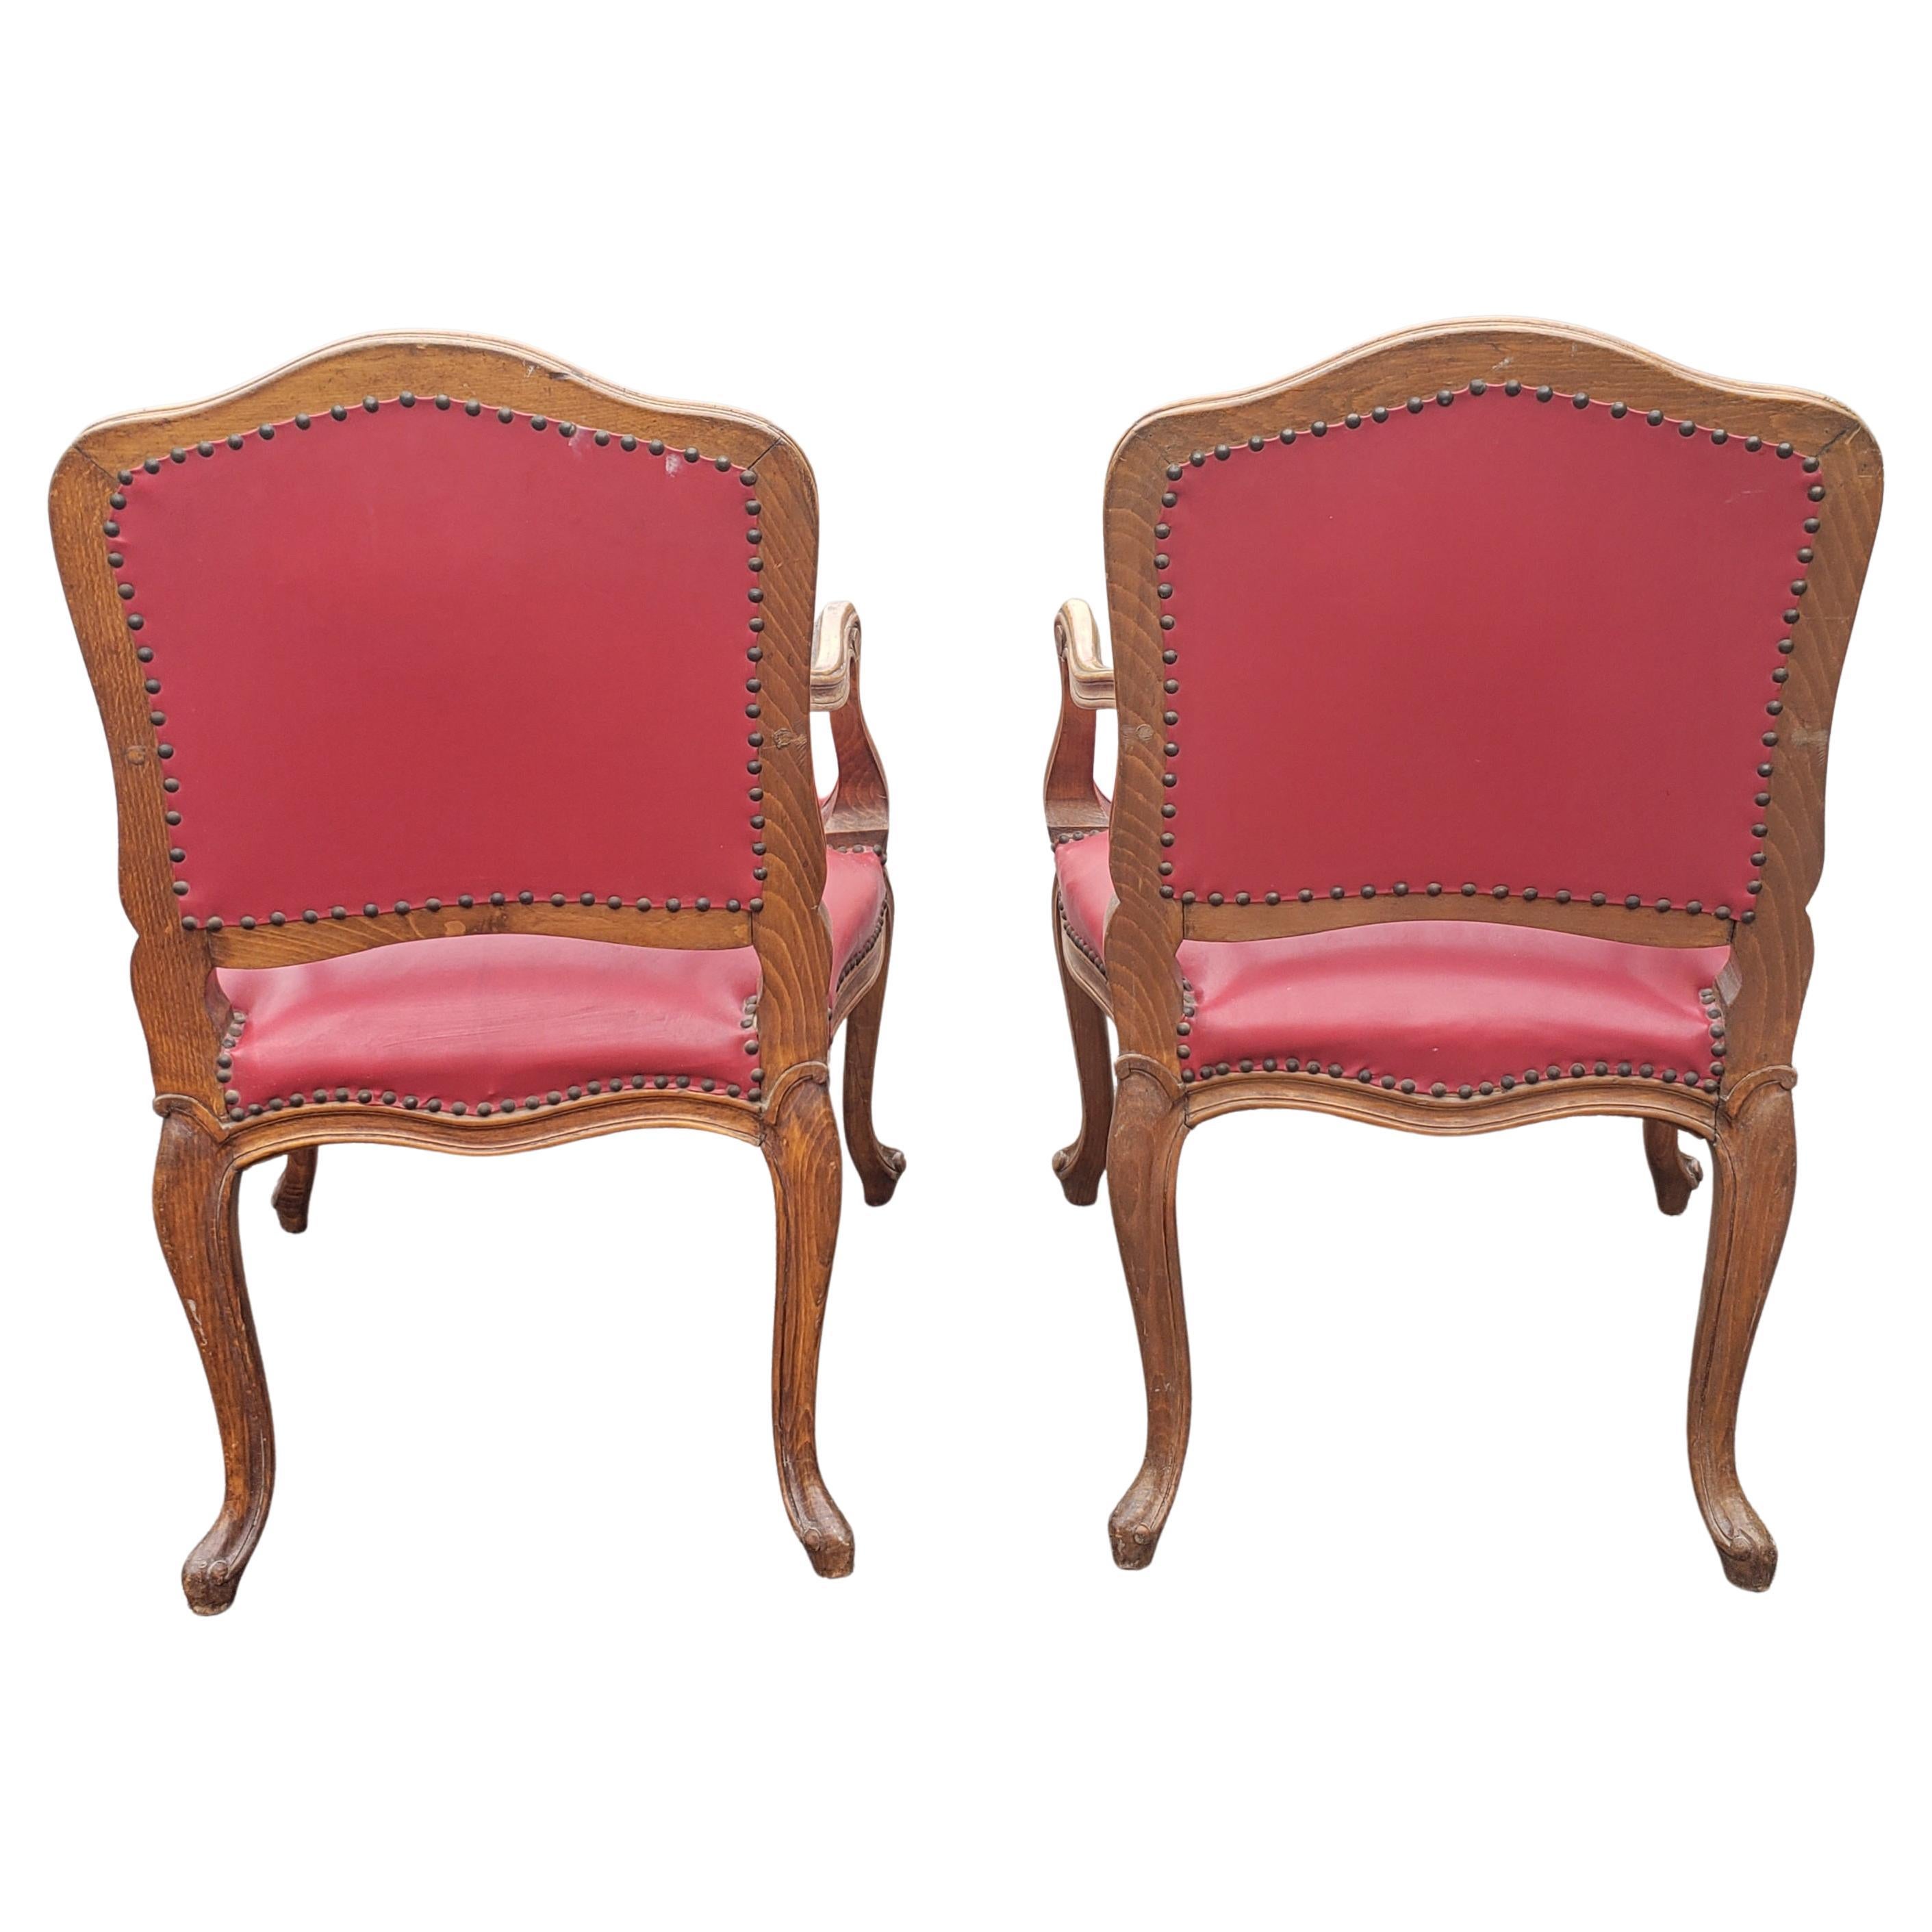 20th Century Pair of French Louis XV Style Tiger Oak and Red Leather Upholstered Fauteuils For Sale